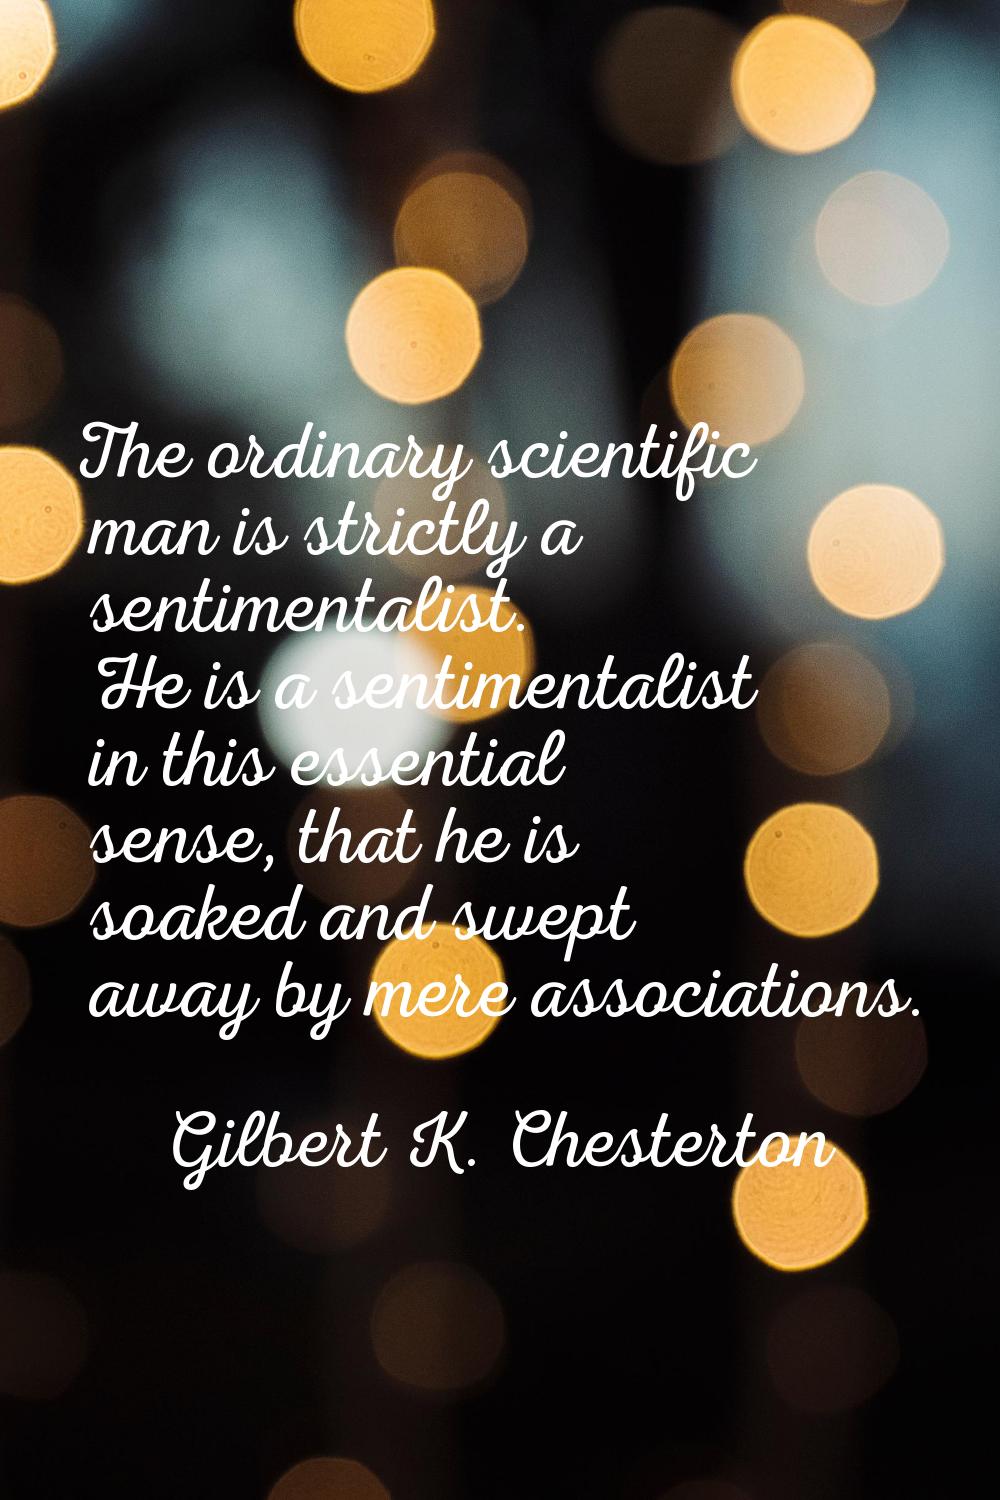 The ordinary scientific man is strictly a sentimentalist. He is a sentimentalist in this essential 